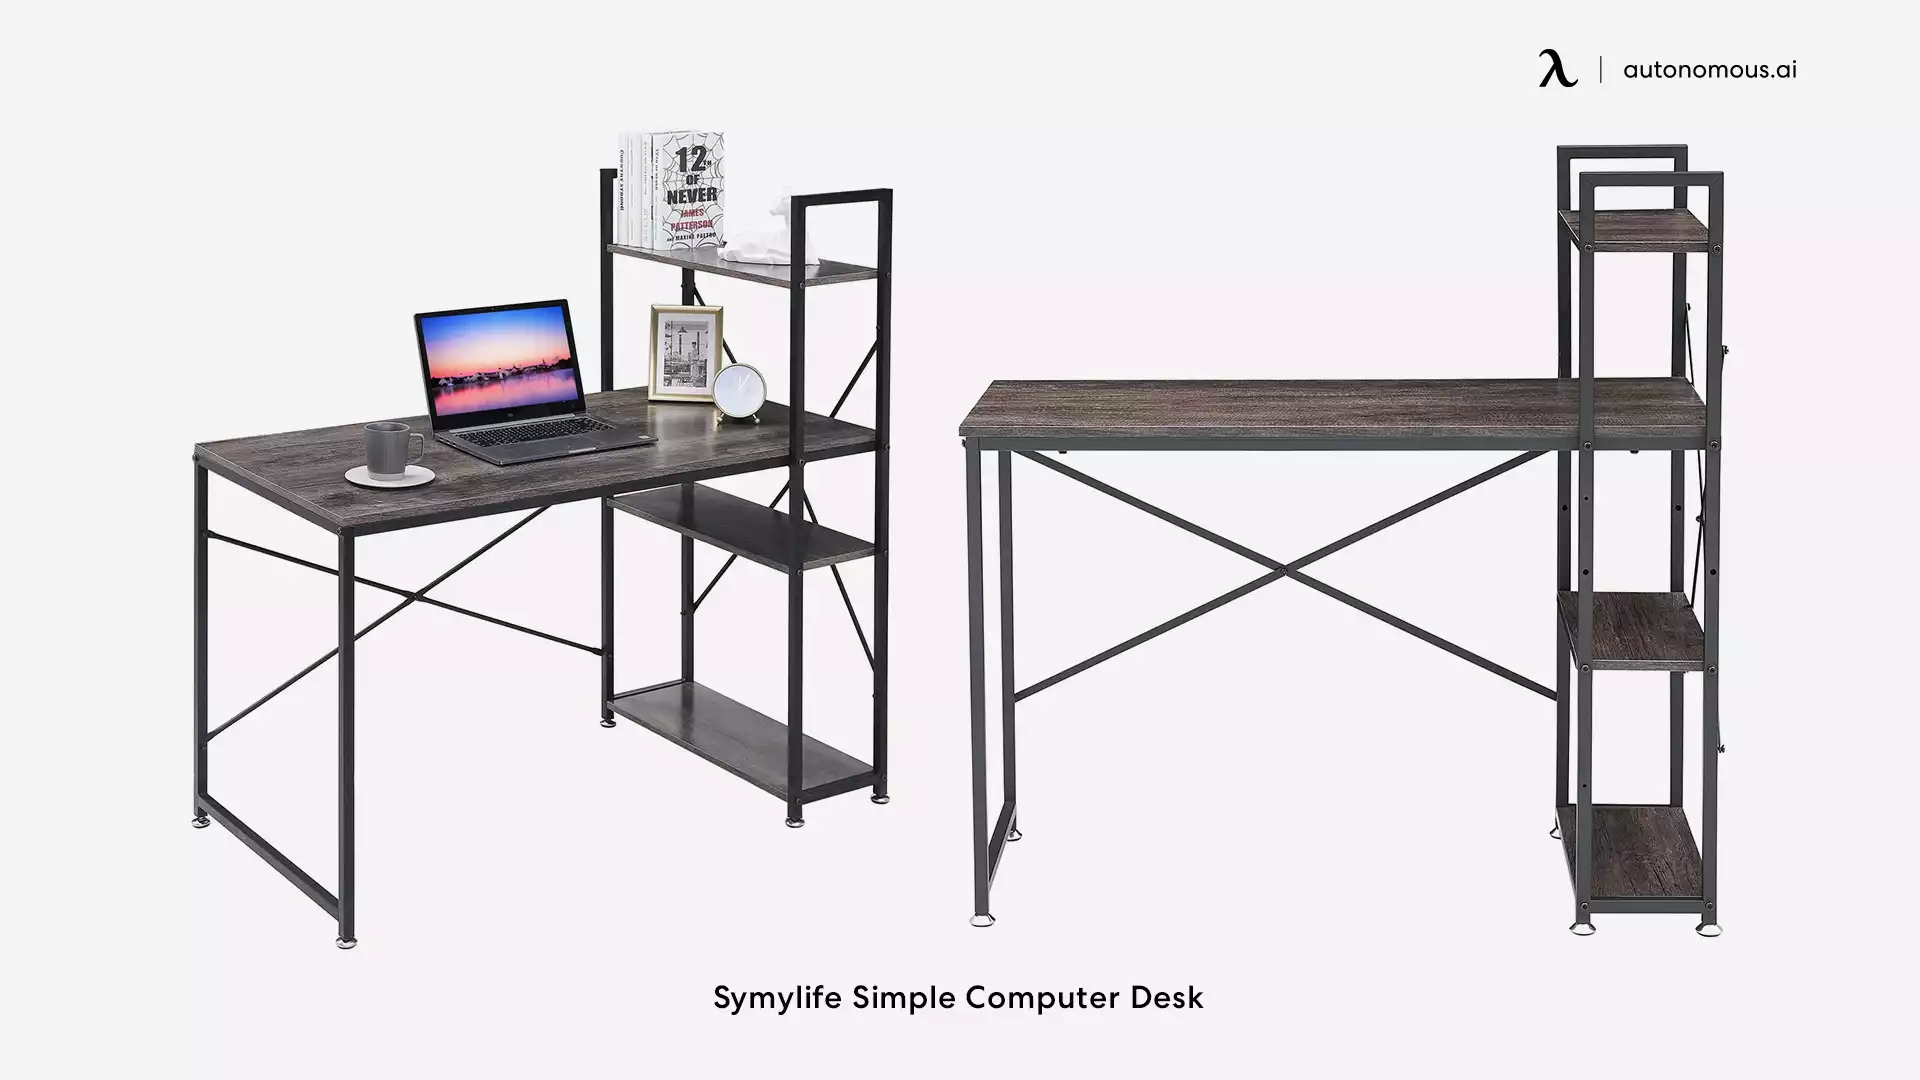 Symylife Simple Computer Desk